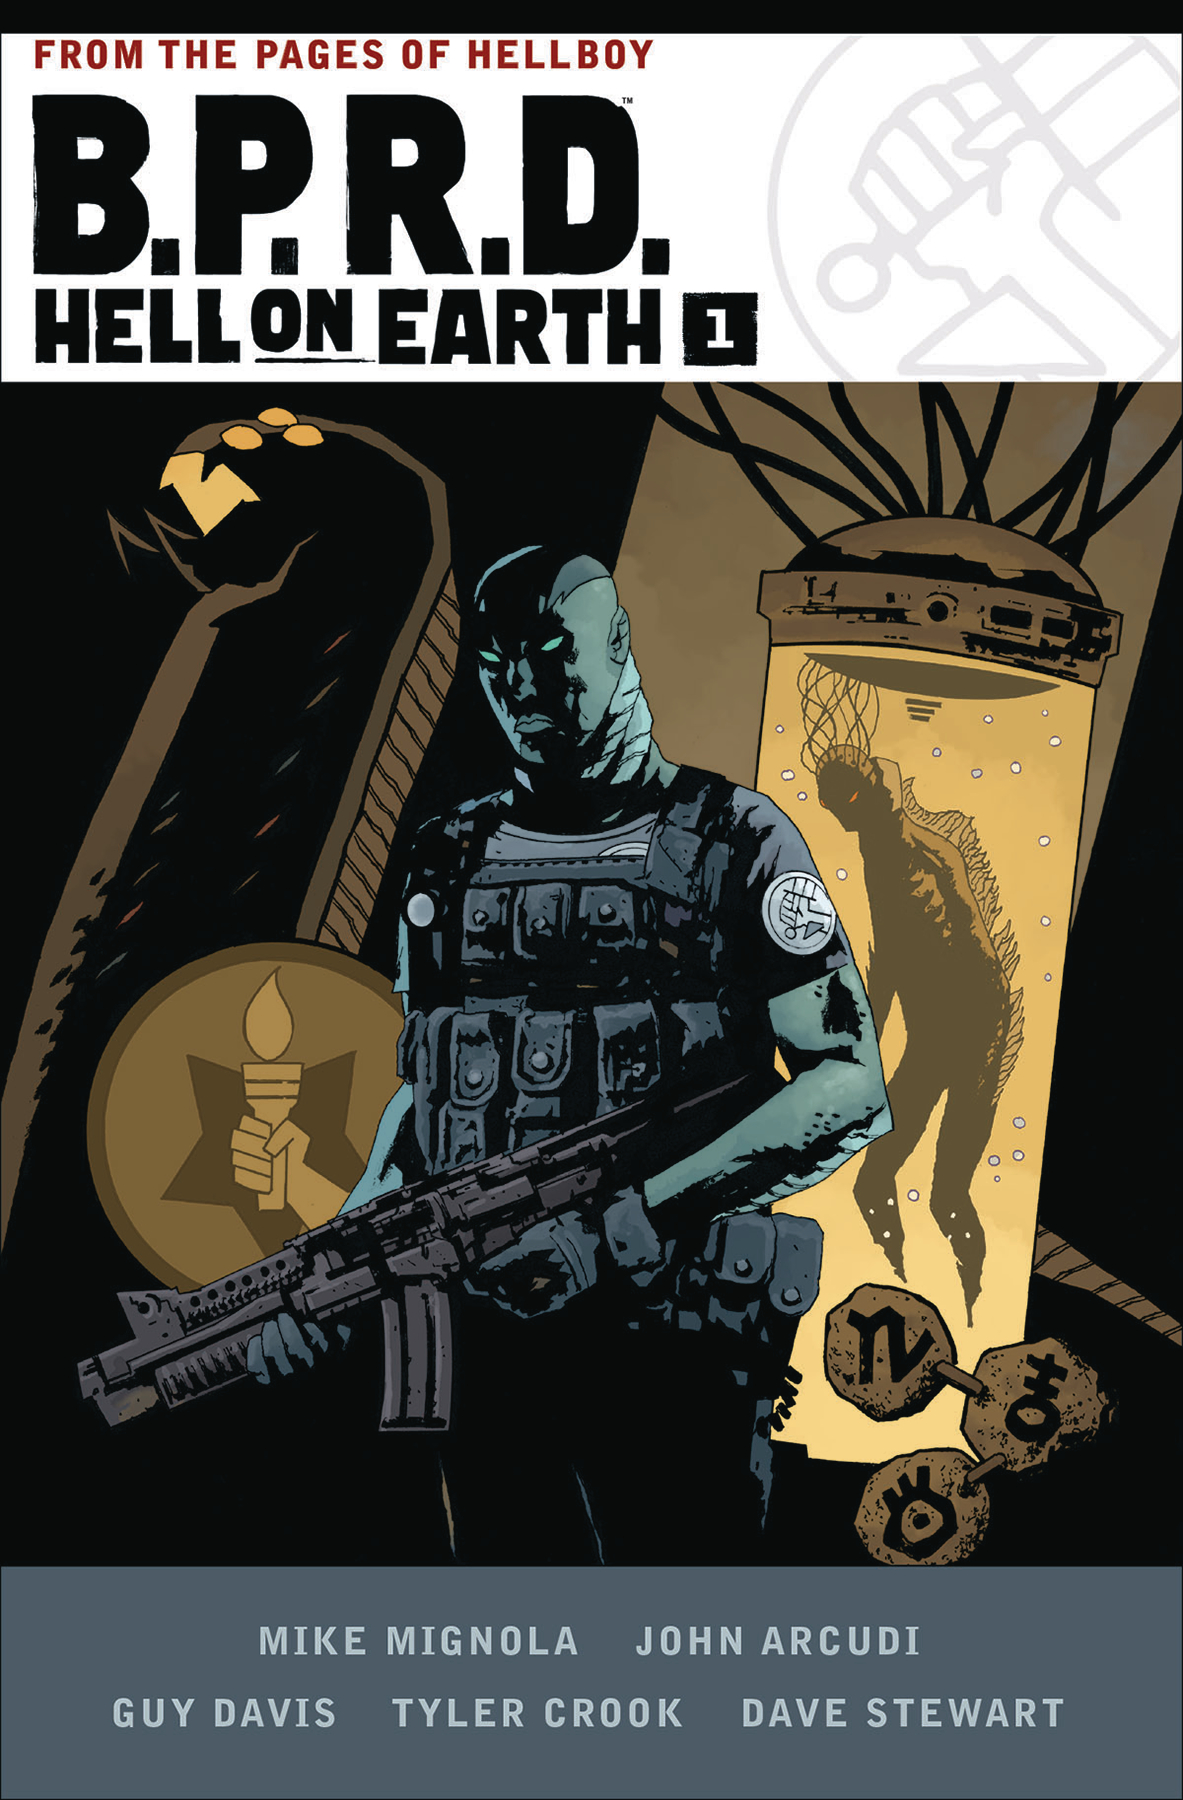 B.P.R.D. Hell on Earth Hardcover Volume 1